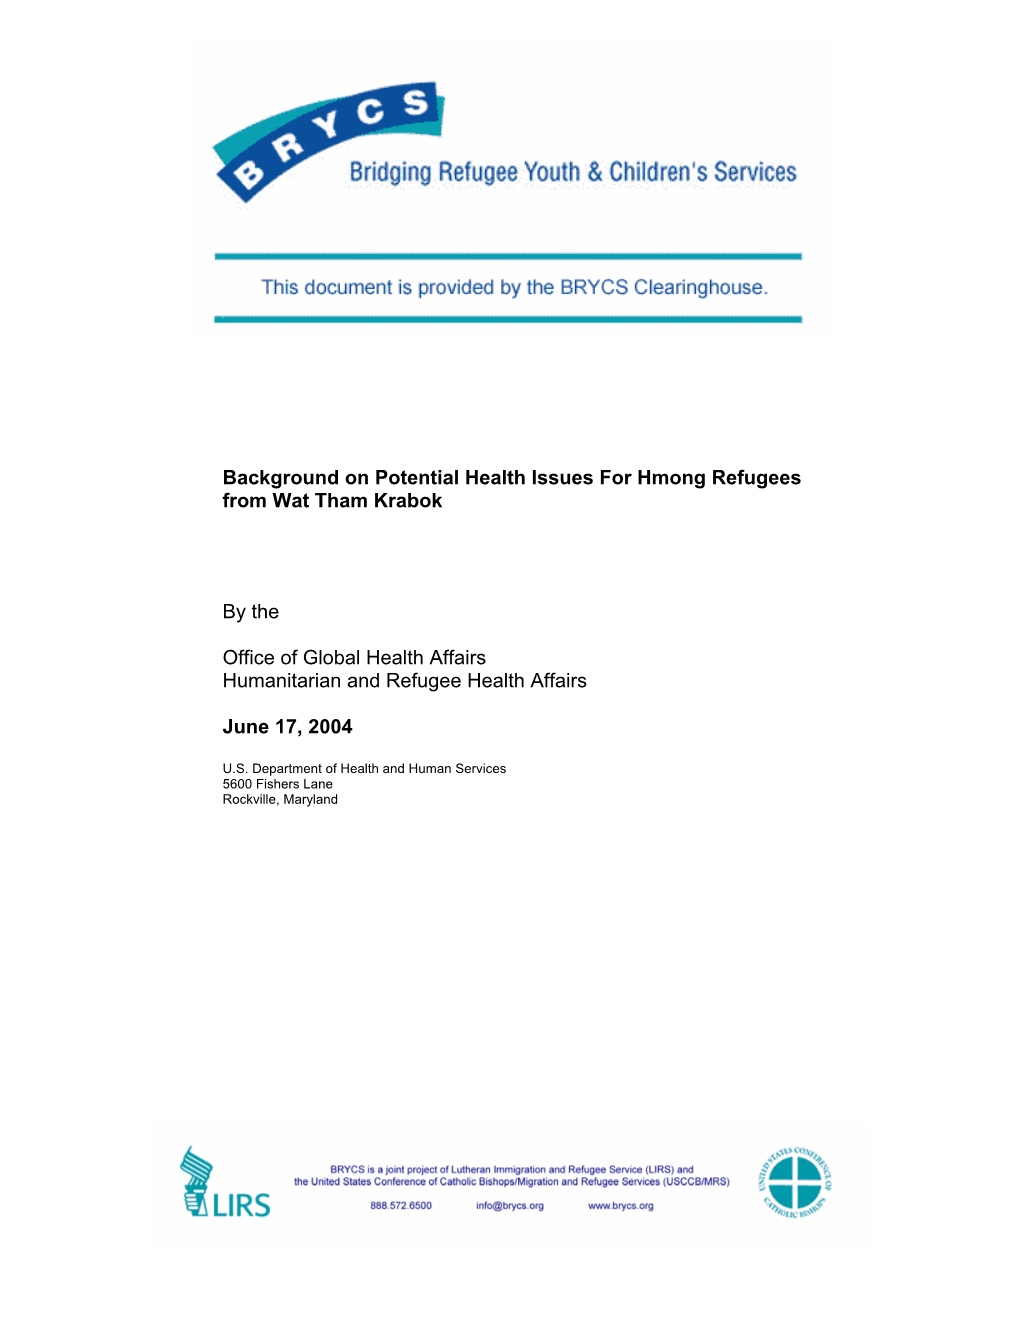 Background on Potential Health Issues for Hmong Refugees from Wat Tham Krabok